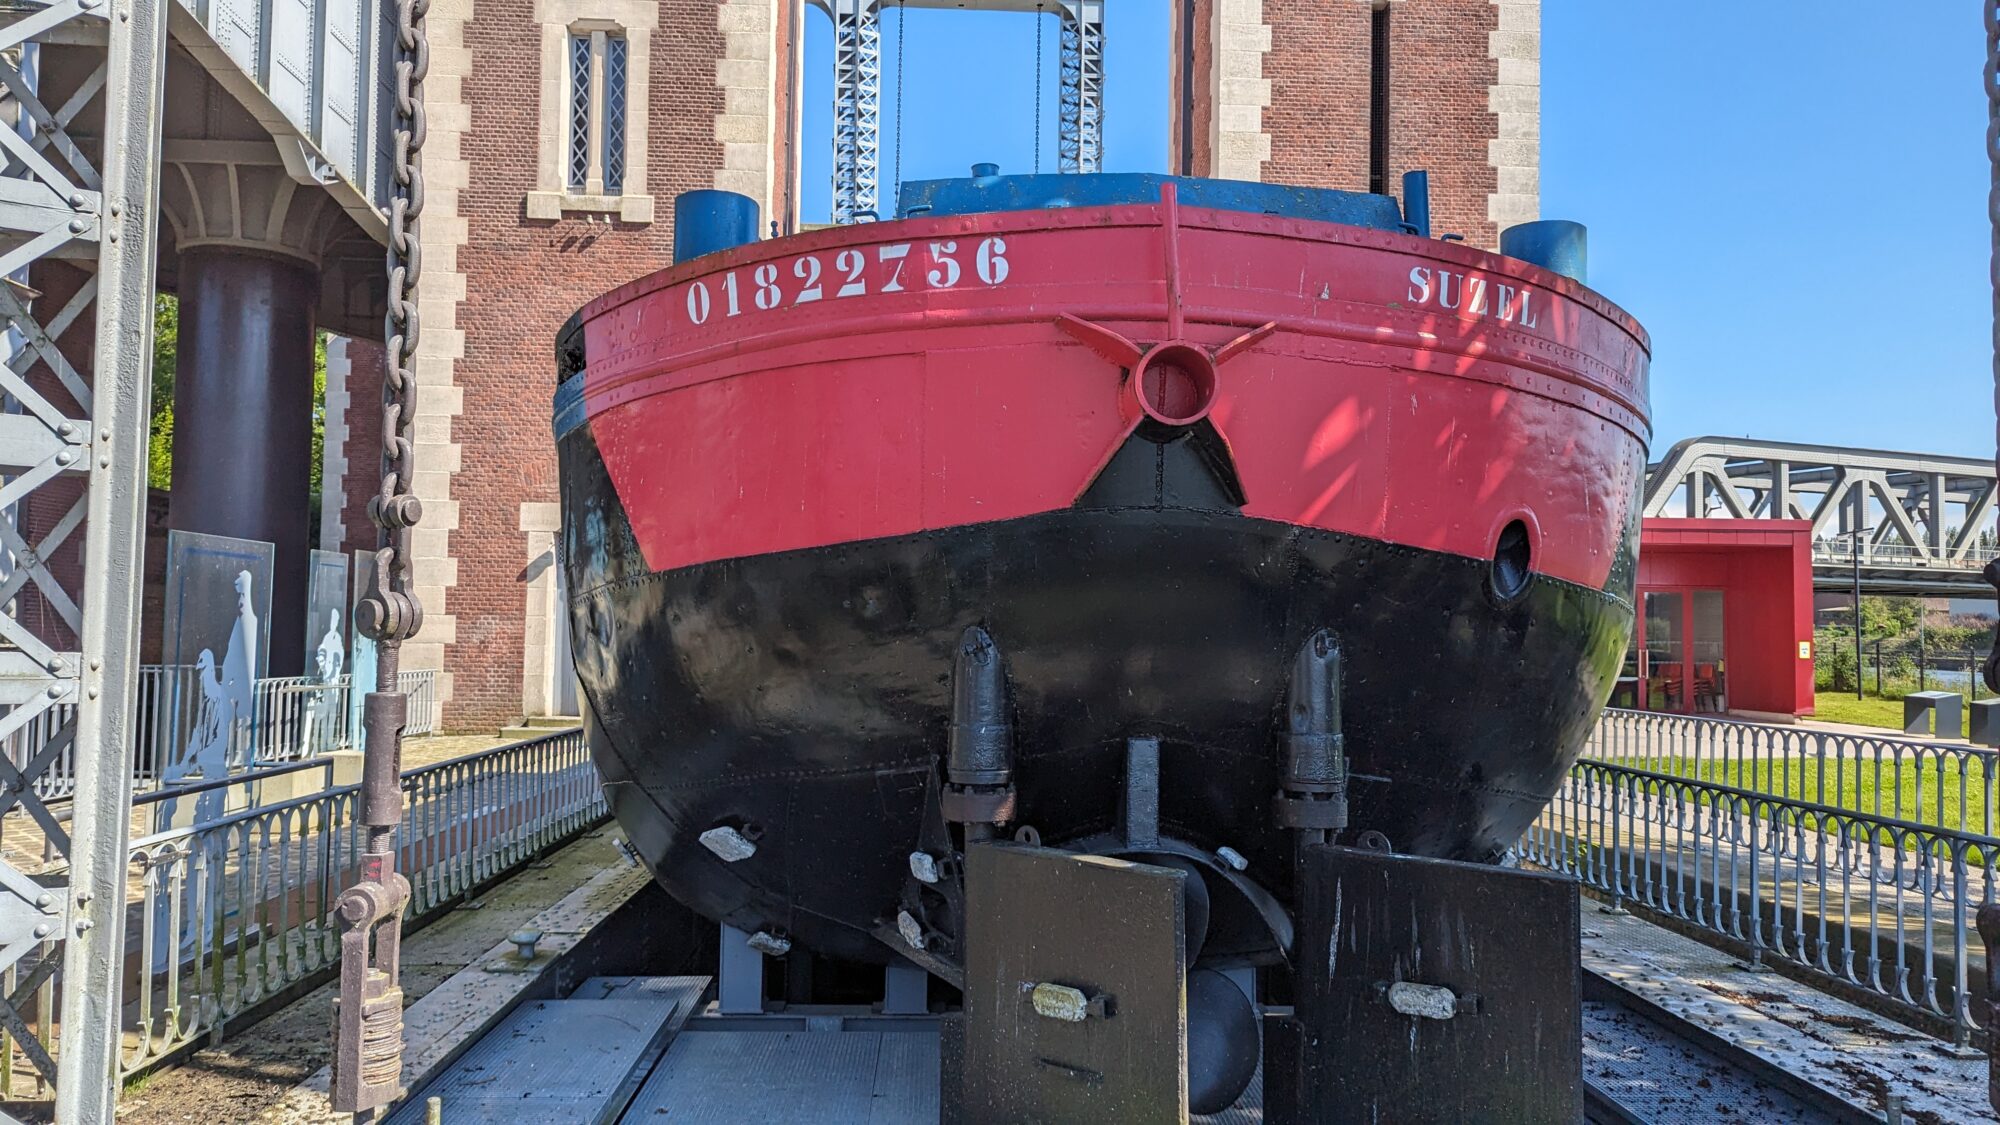 Red-painted stern of the barge Suzel